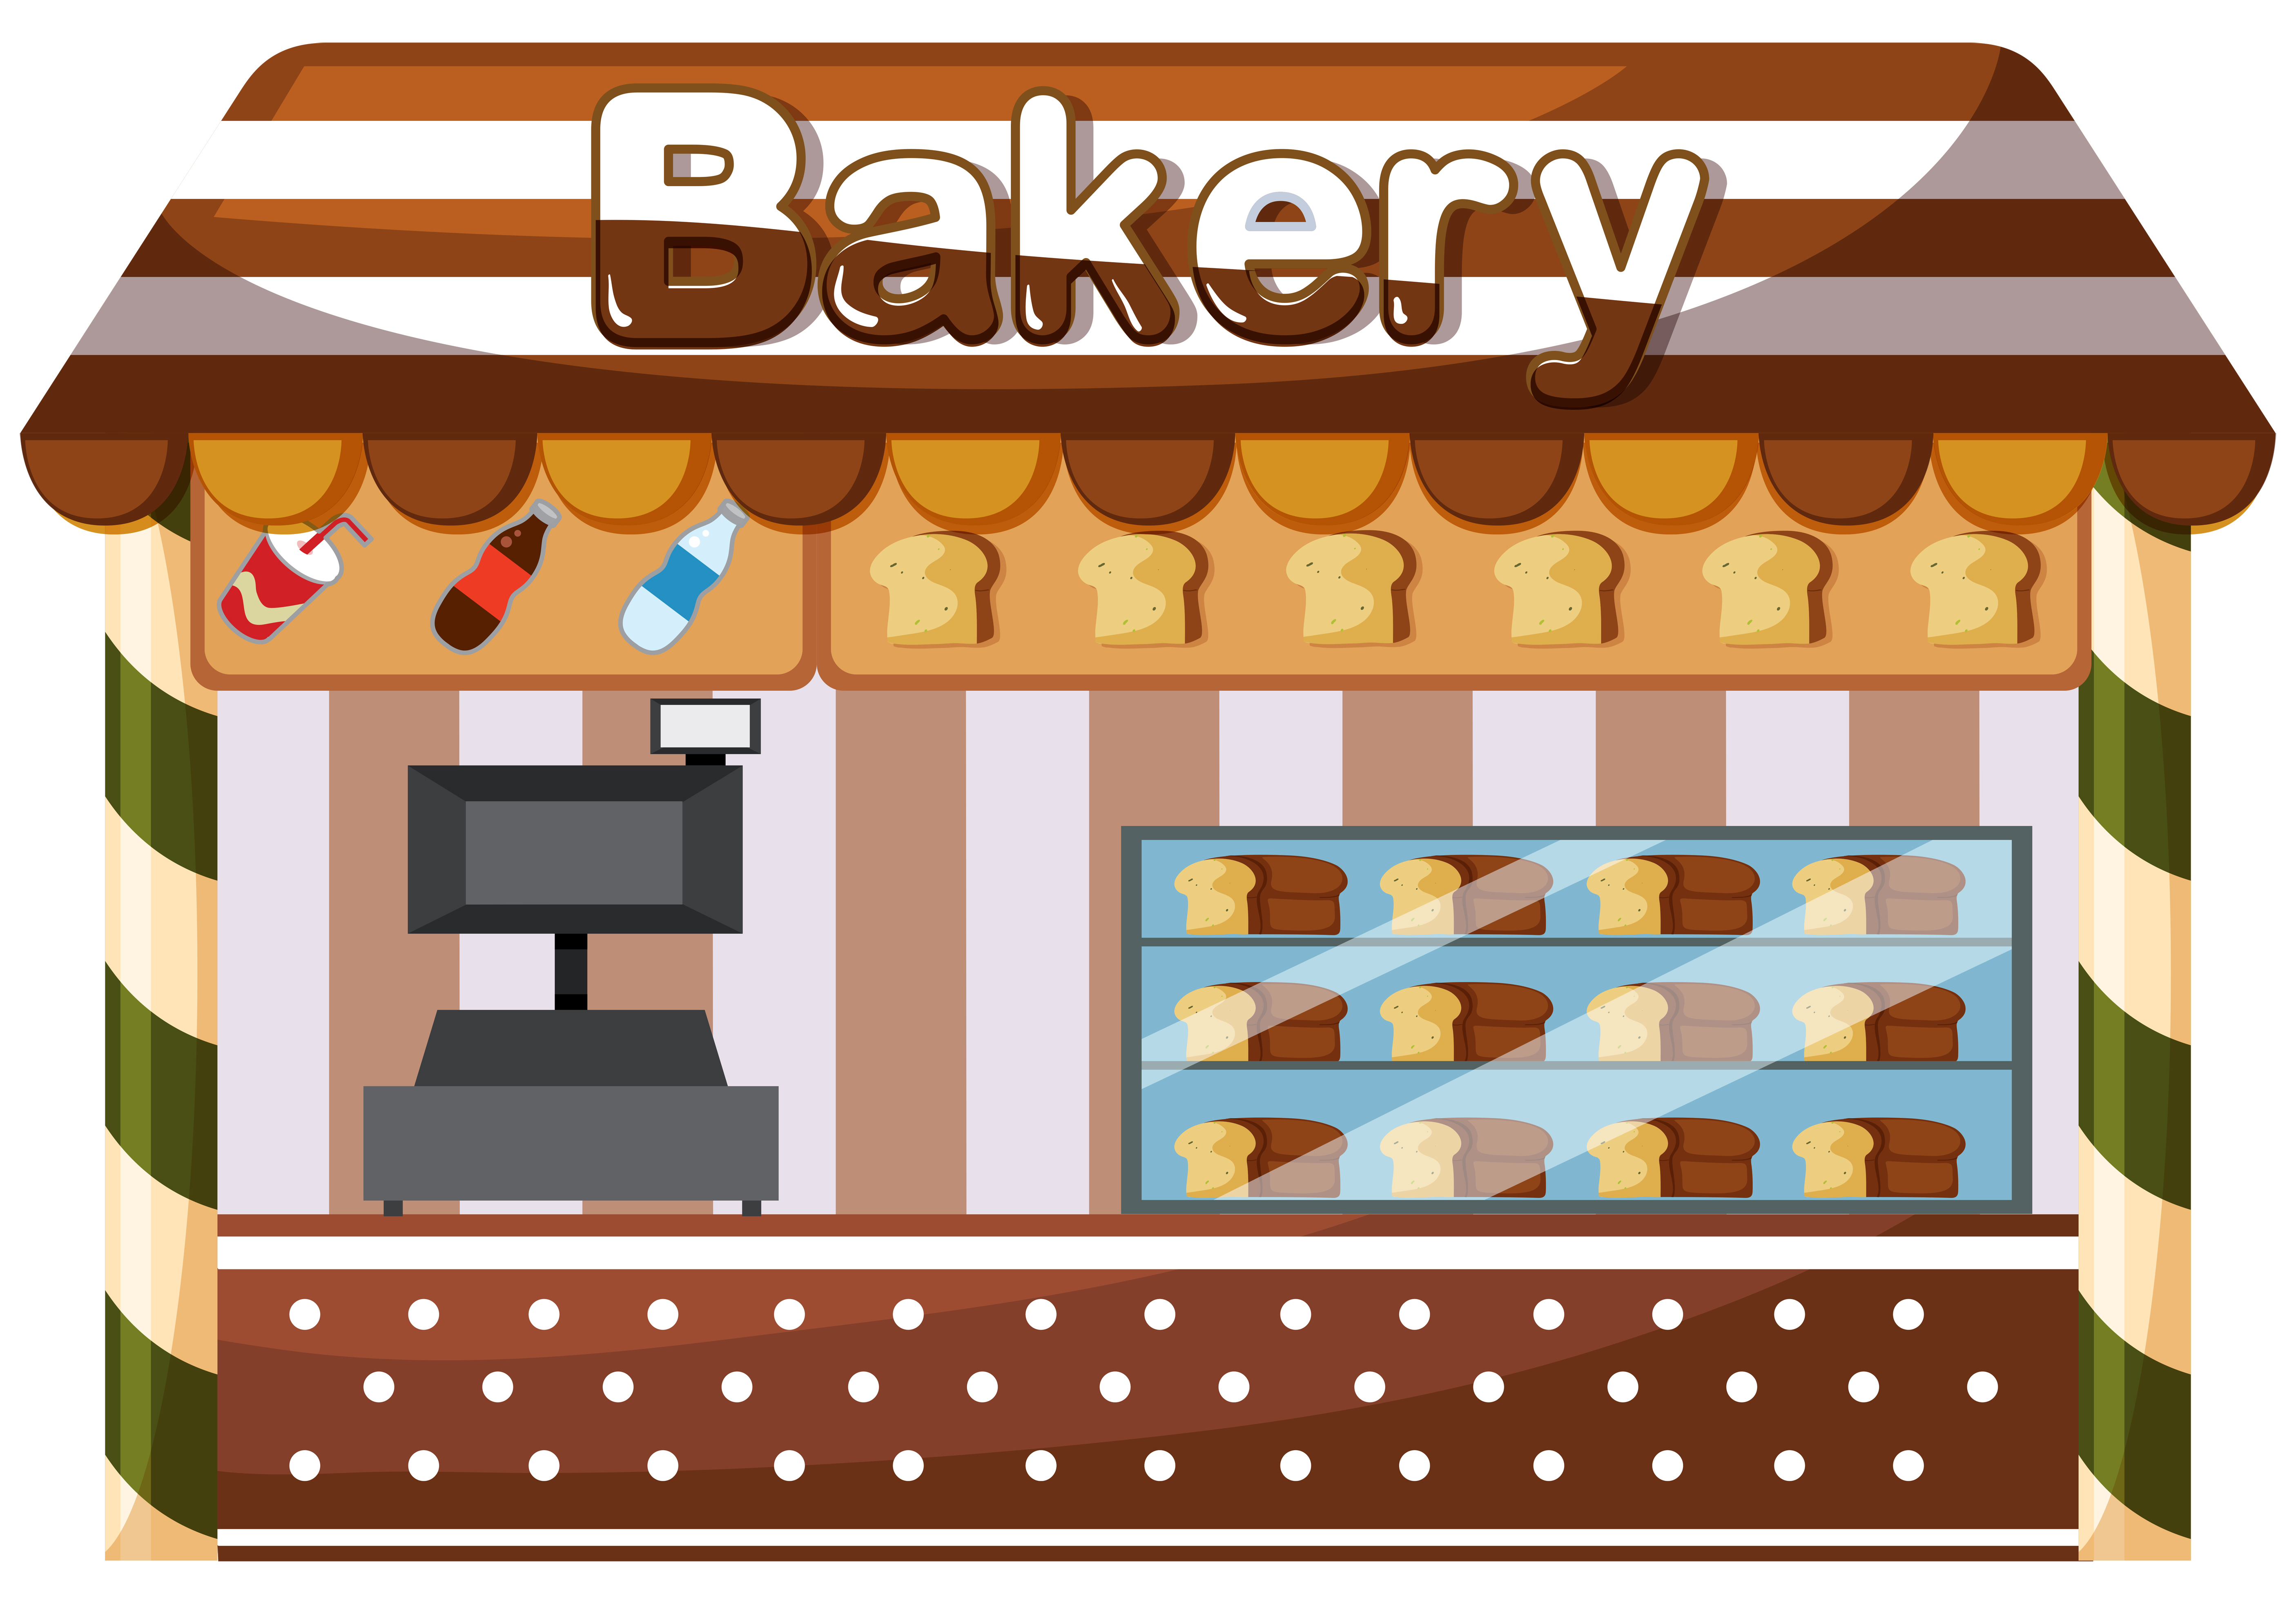 Bakery Drawing Images : Bakery Shop Draw Closed Village Pages Quaint ...